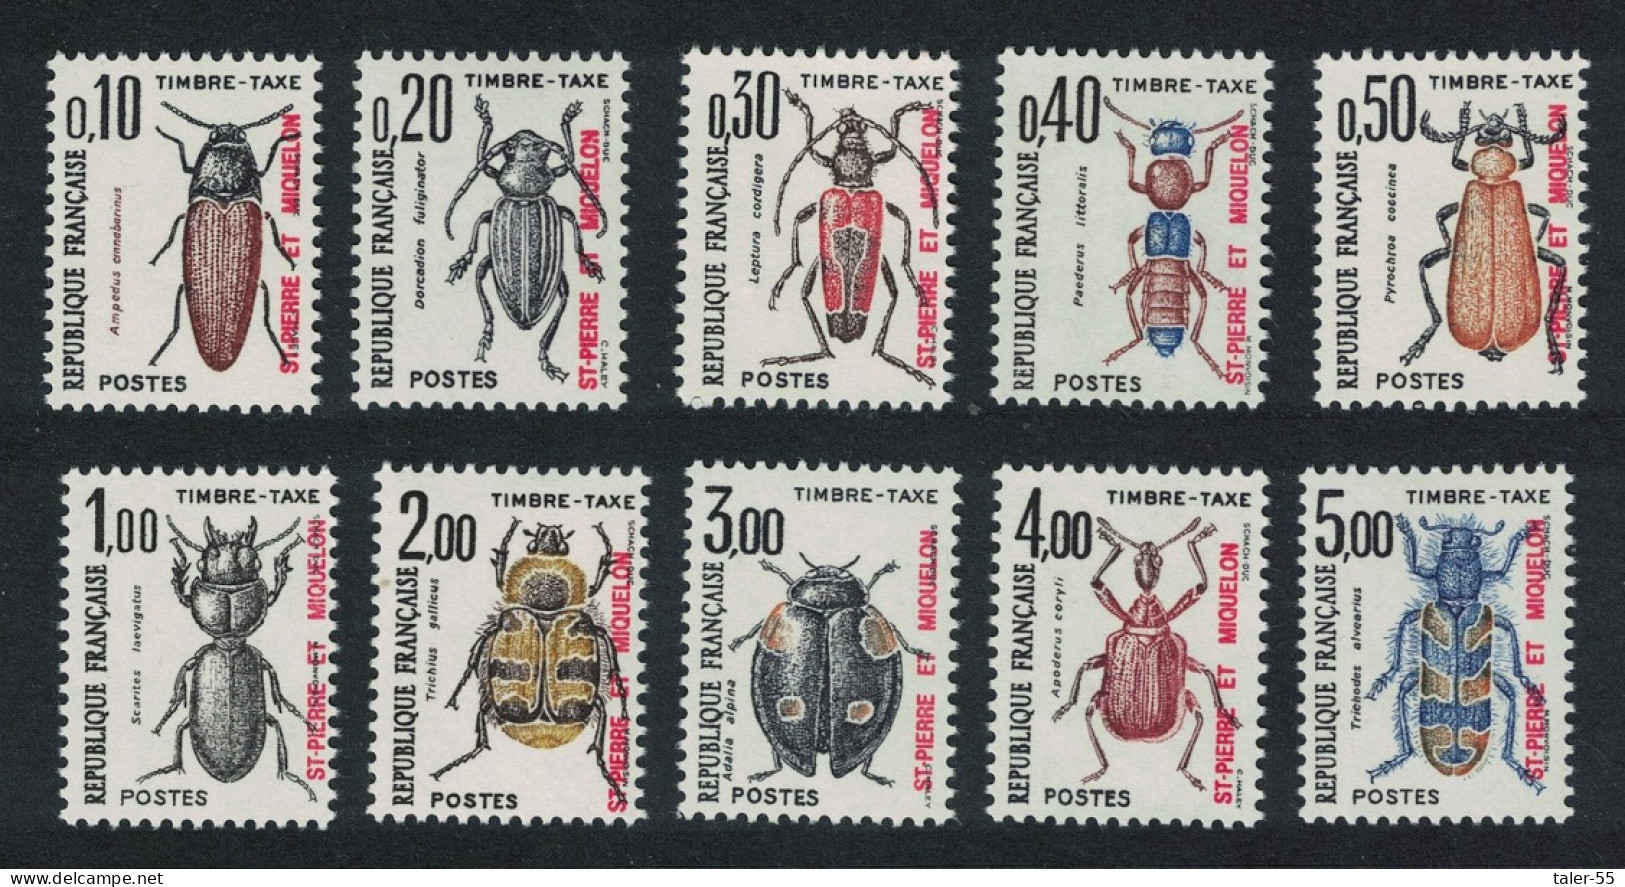 St. Pierre And Miquelon Beetles Insects Postage Due 10v 1986 MNH SG#D569-D578 - Nuovi